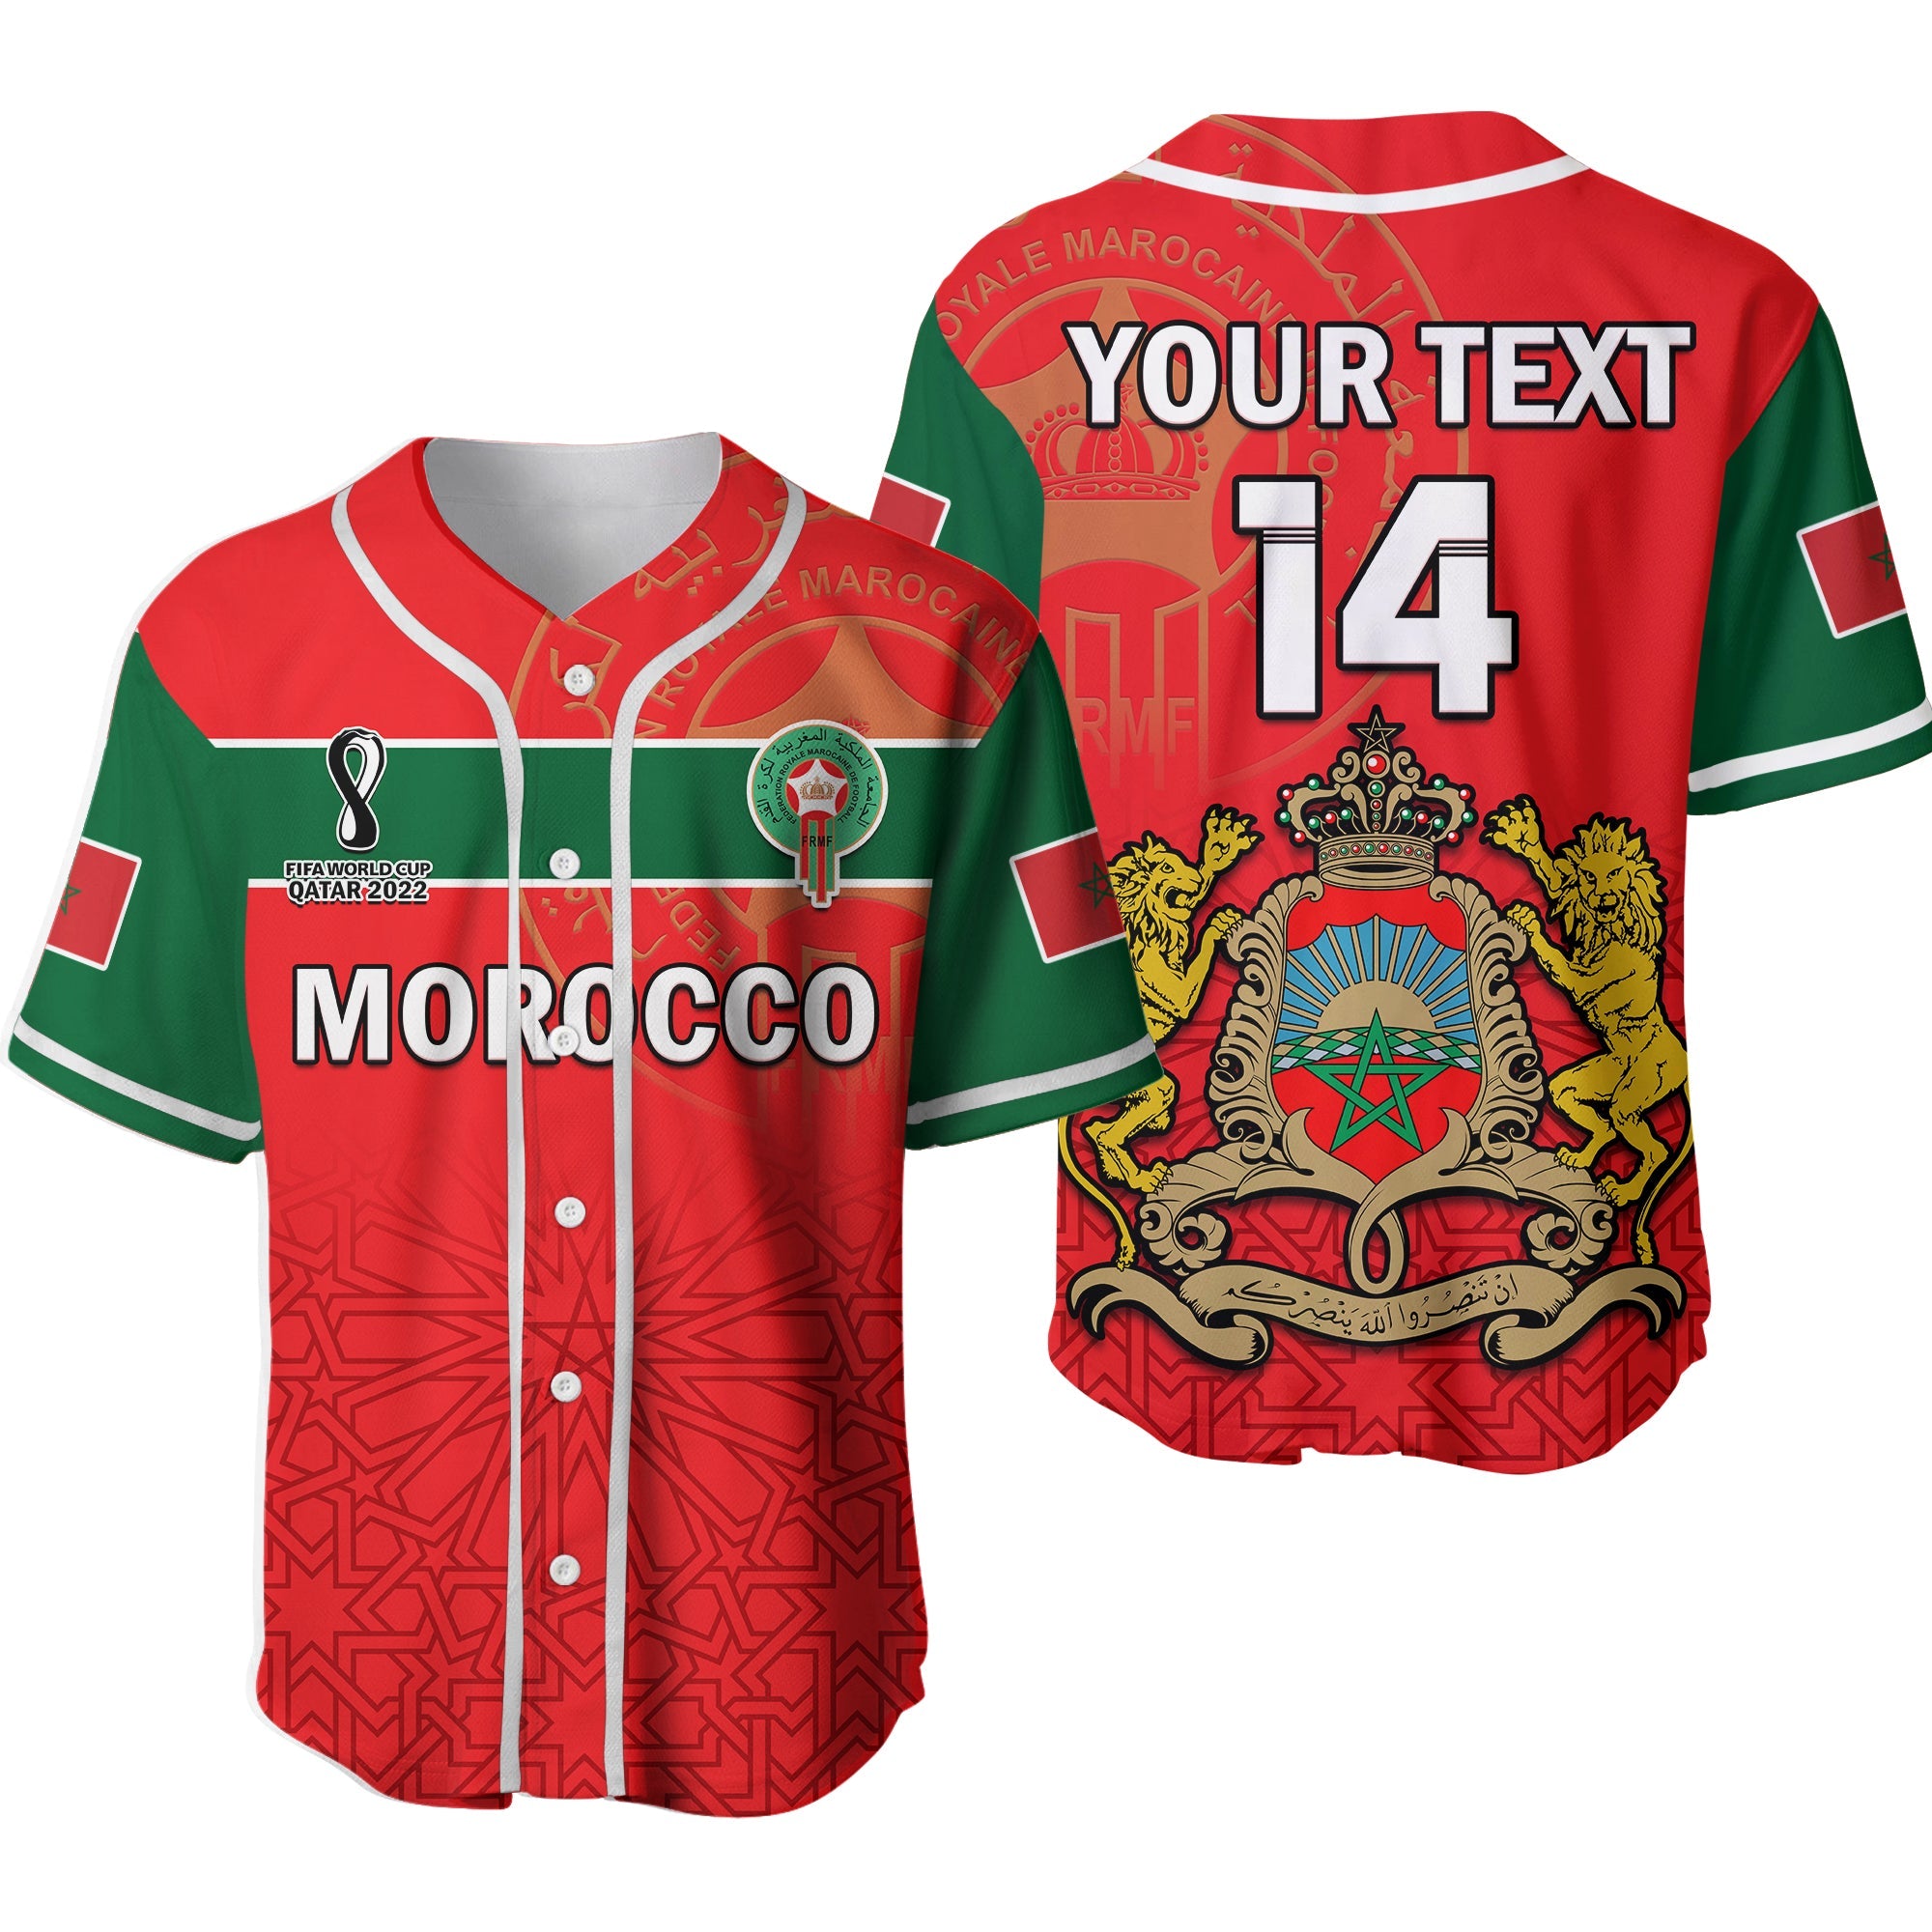 custom-text-and-number-morocco-football-baseball-jersey-atlas-lions-red-world-cup-2022-ver02